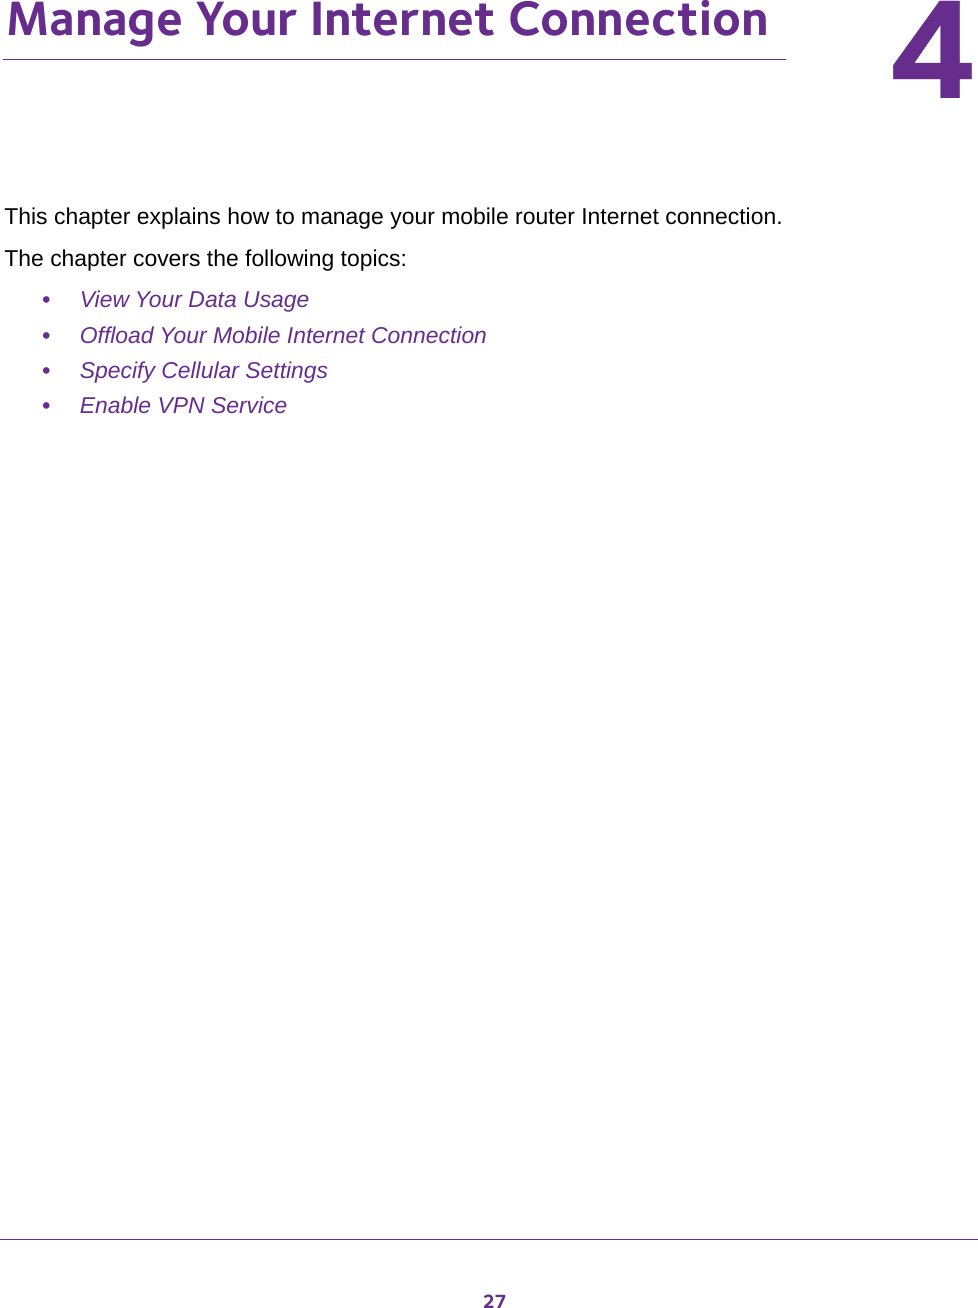 2744.   Manage Your Internet ConnectionThis chapter explains how to manage your mobile router Internet connection. The chapter covers the following topics:•View Your Data Usage•Offload Your Mobile Internet Connection•Specify Cellular Settings•Enable VPN Service